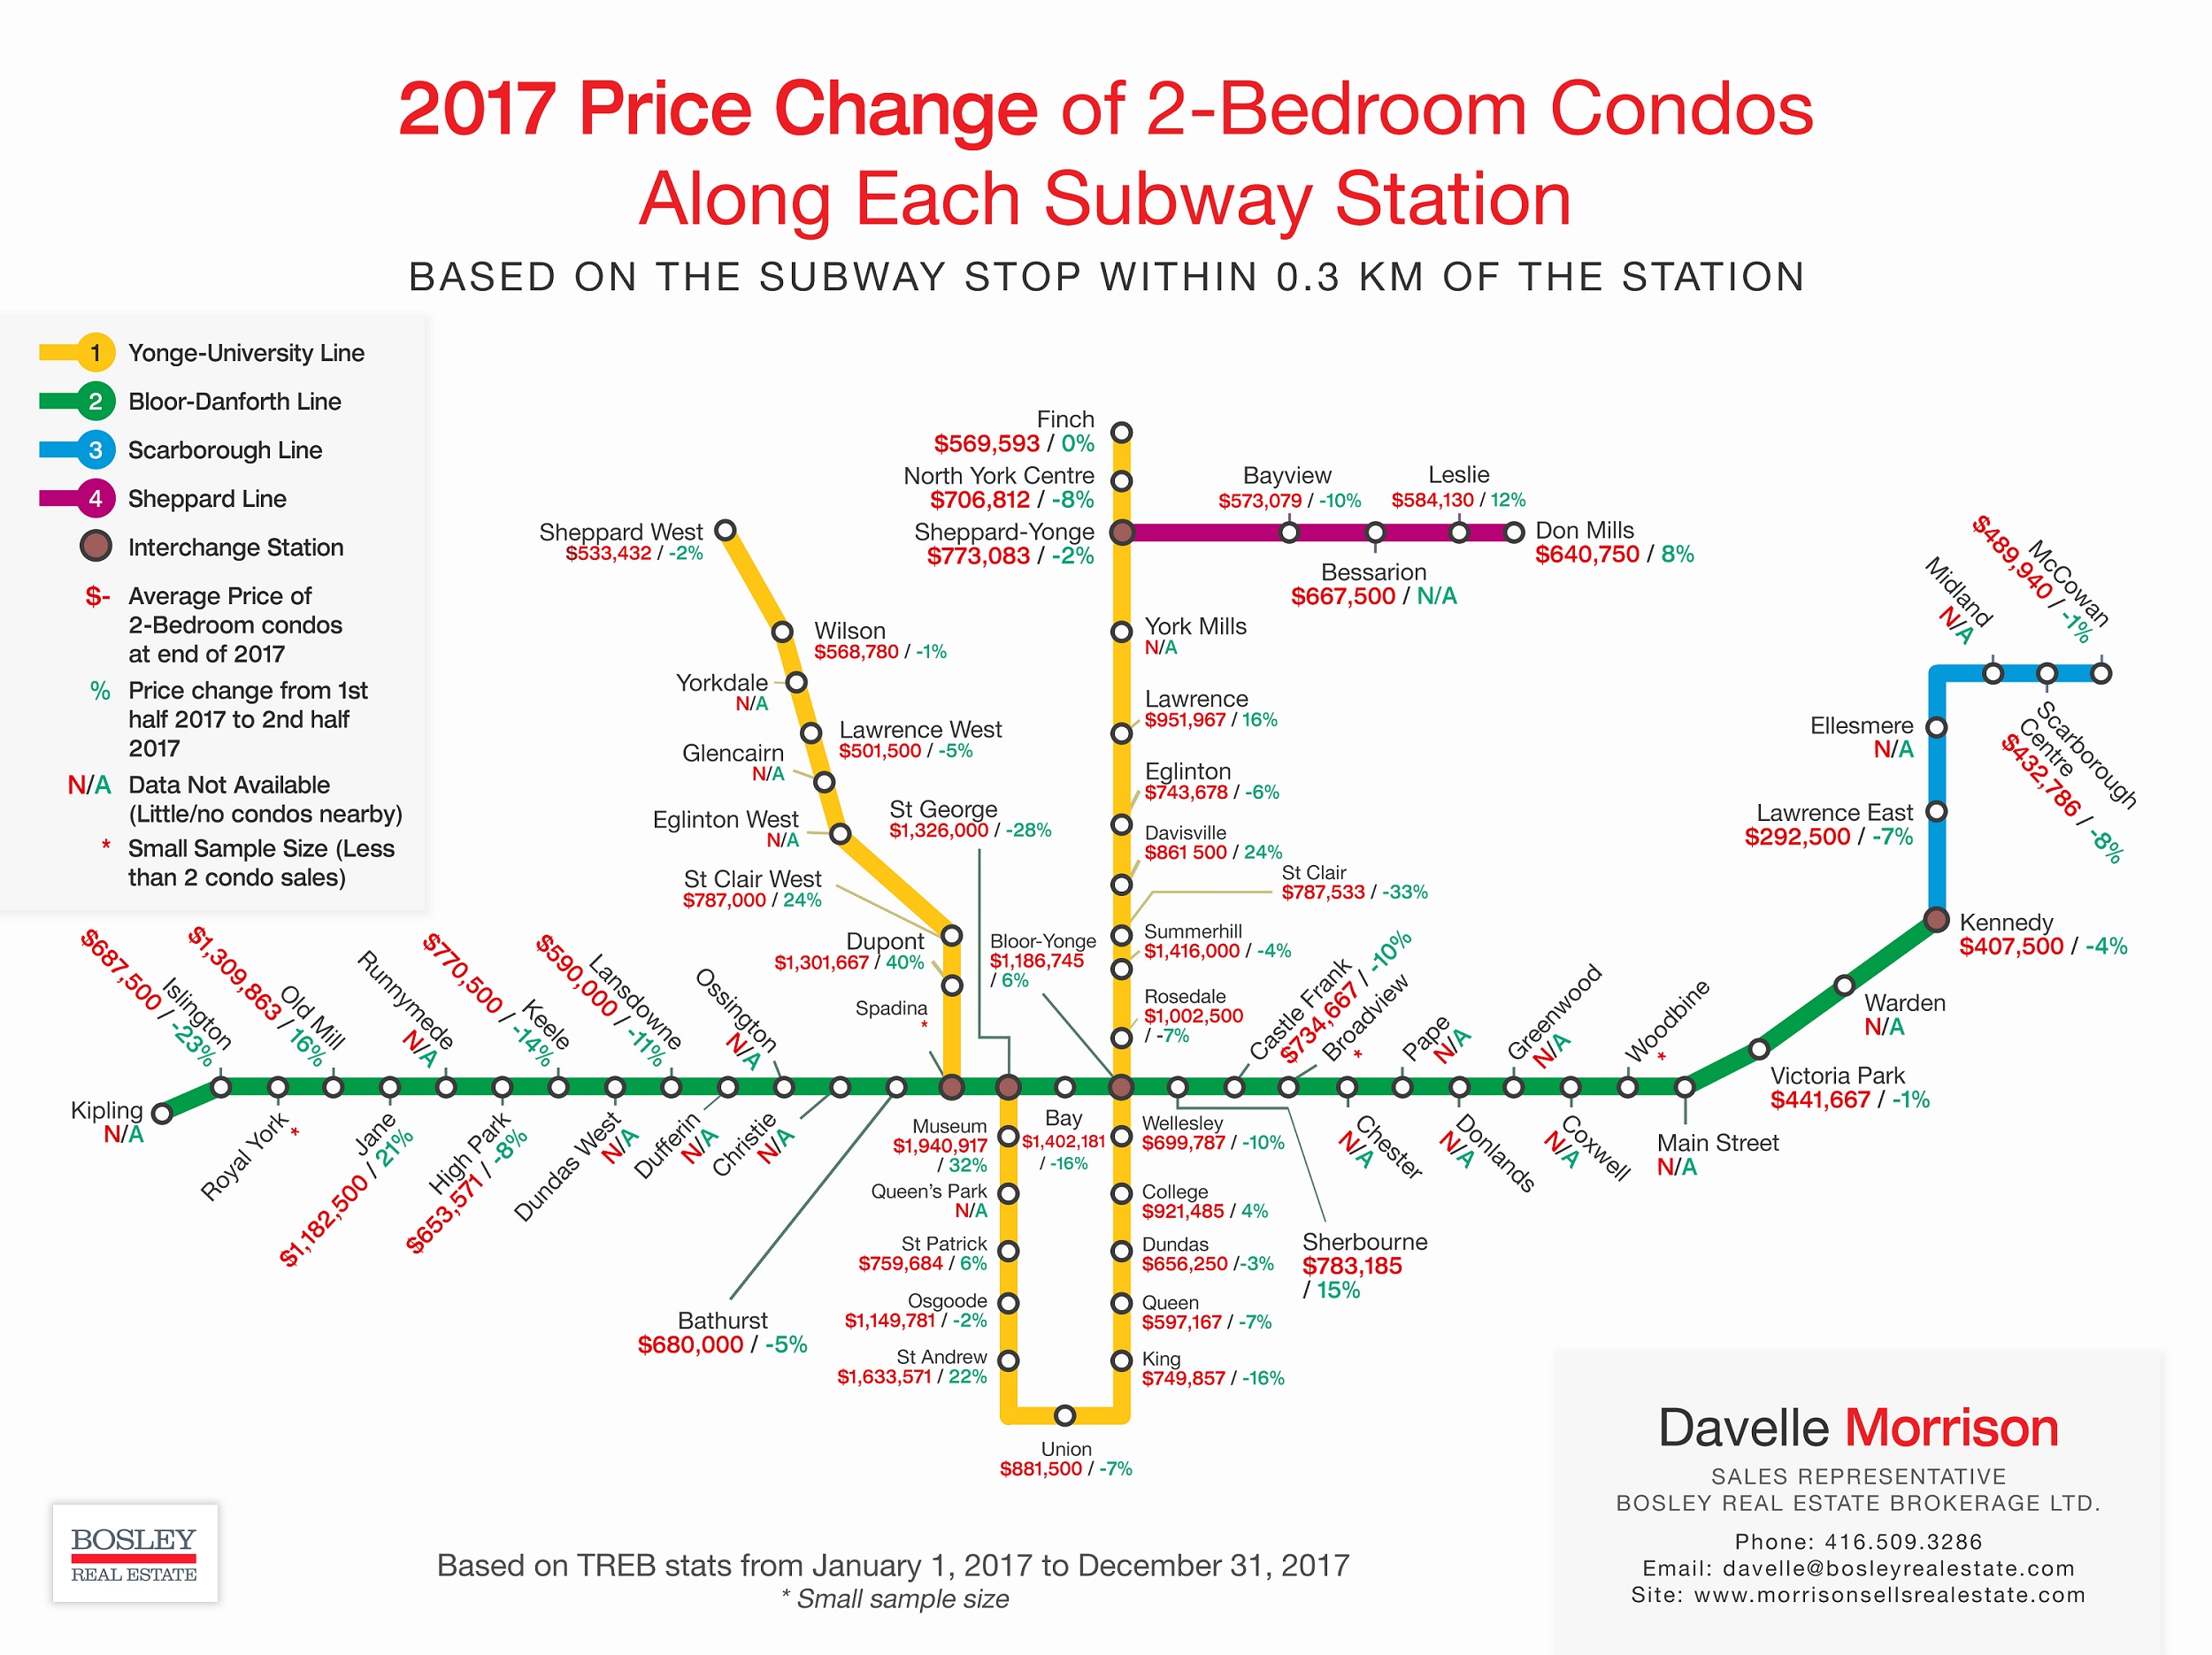 2017 Price Change For 2 Bedroom Condos Near TTC Stations